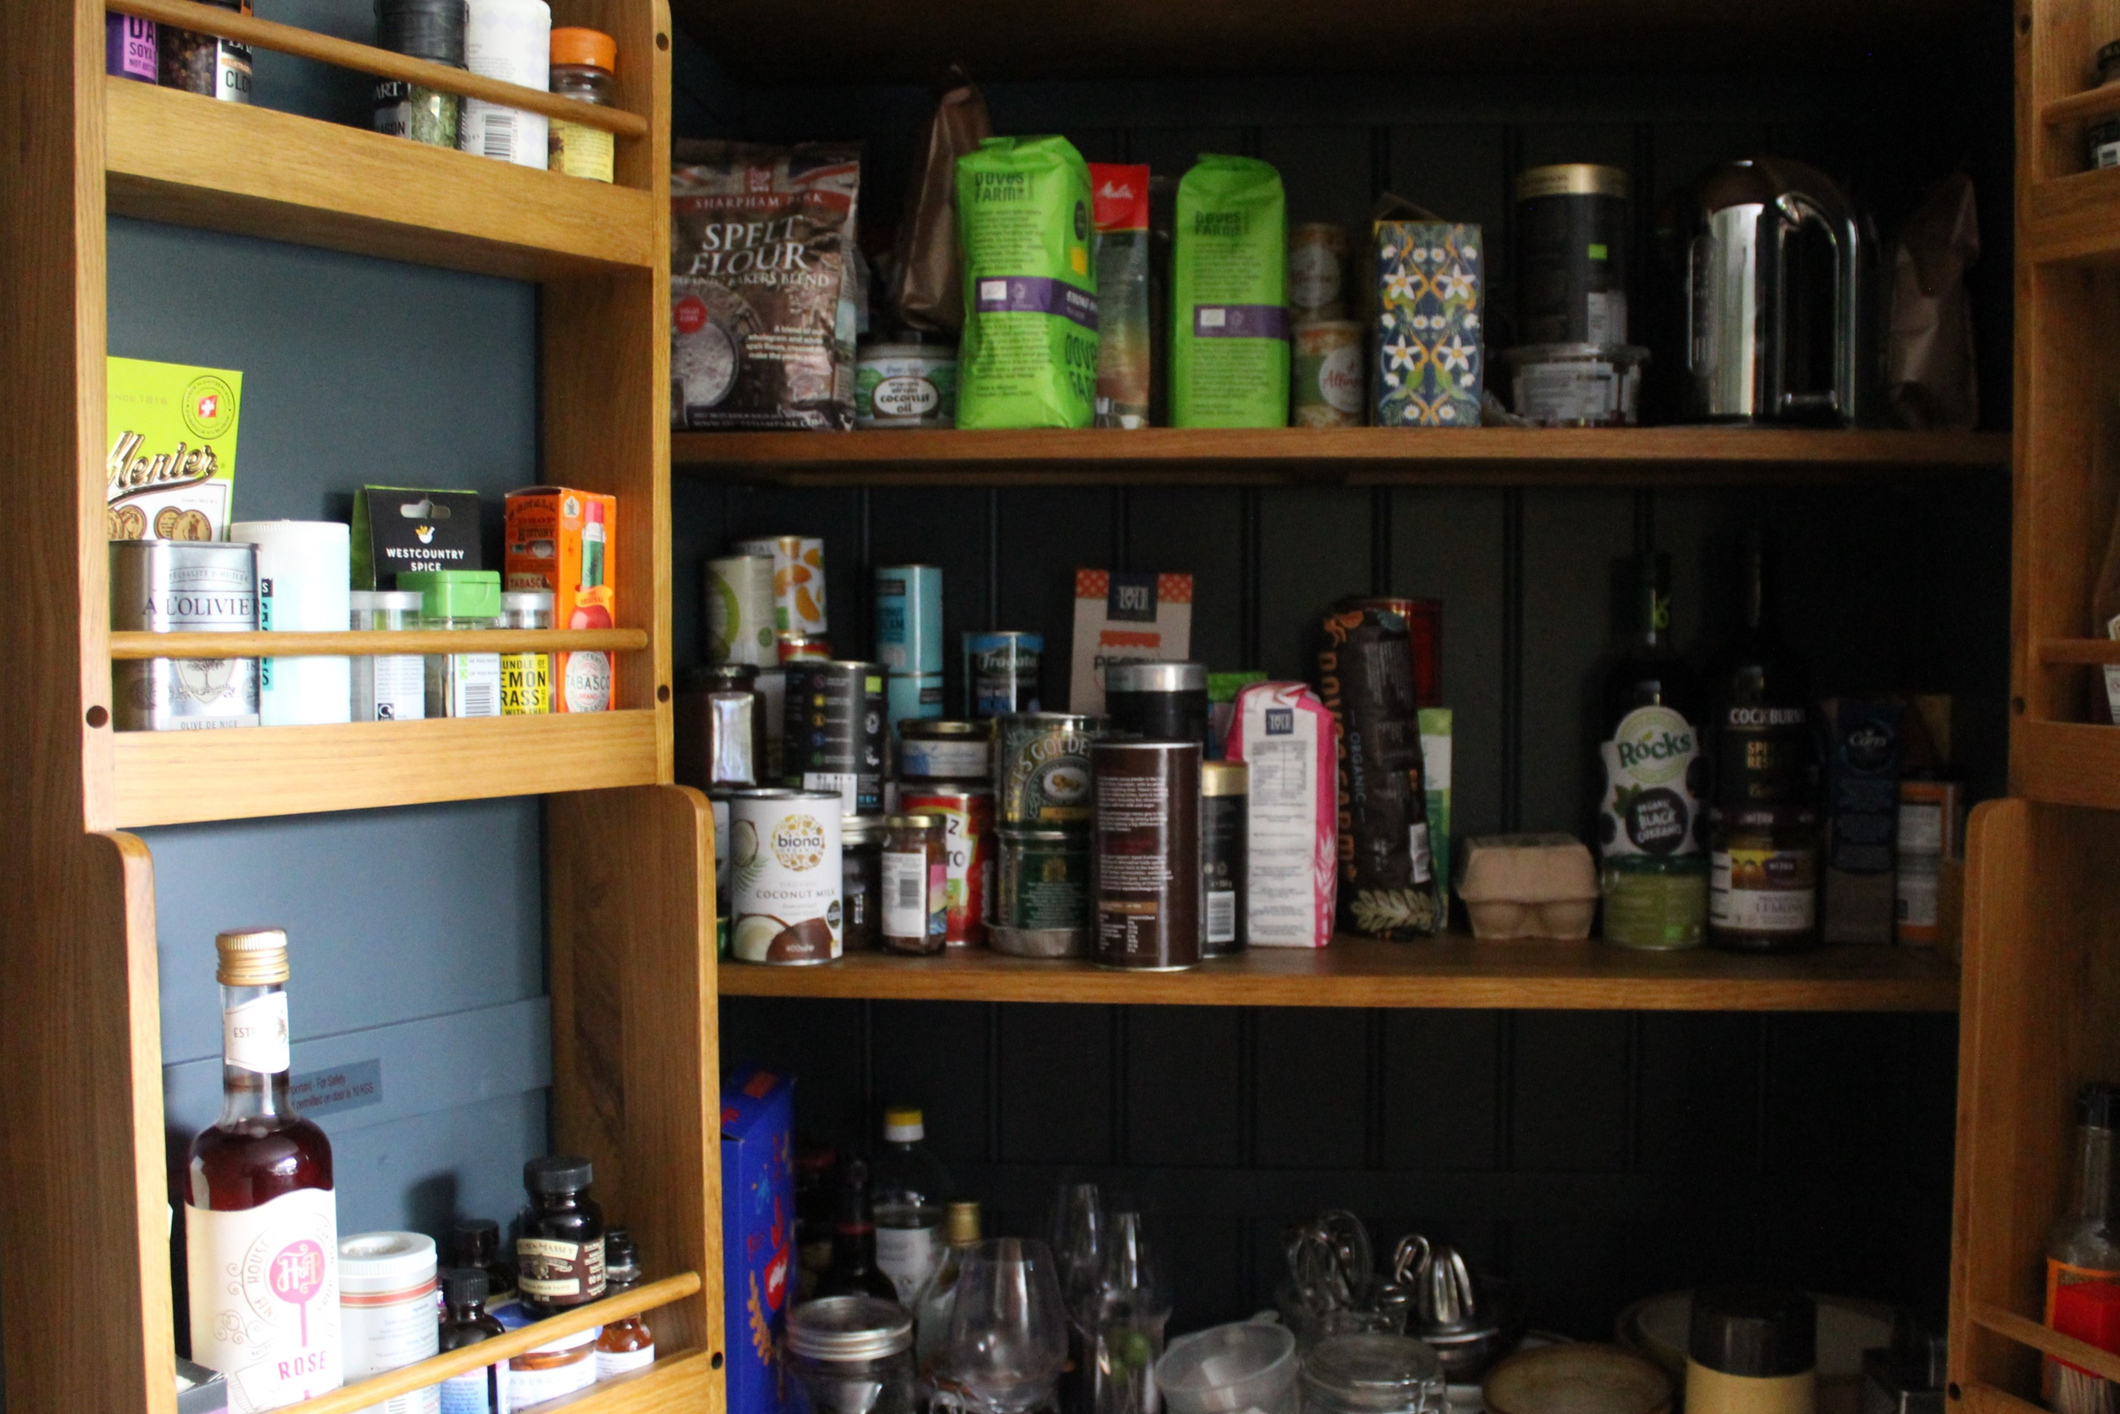 3 Tips to Help You Organize Your Pantry and Make the Most Use of Space